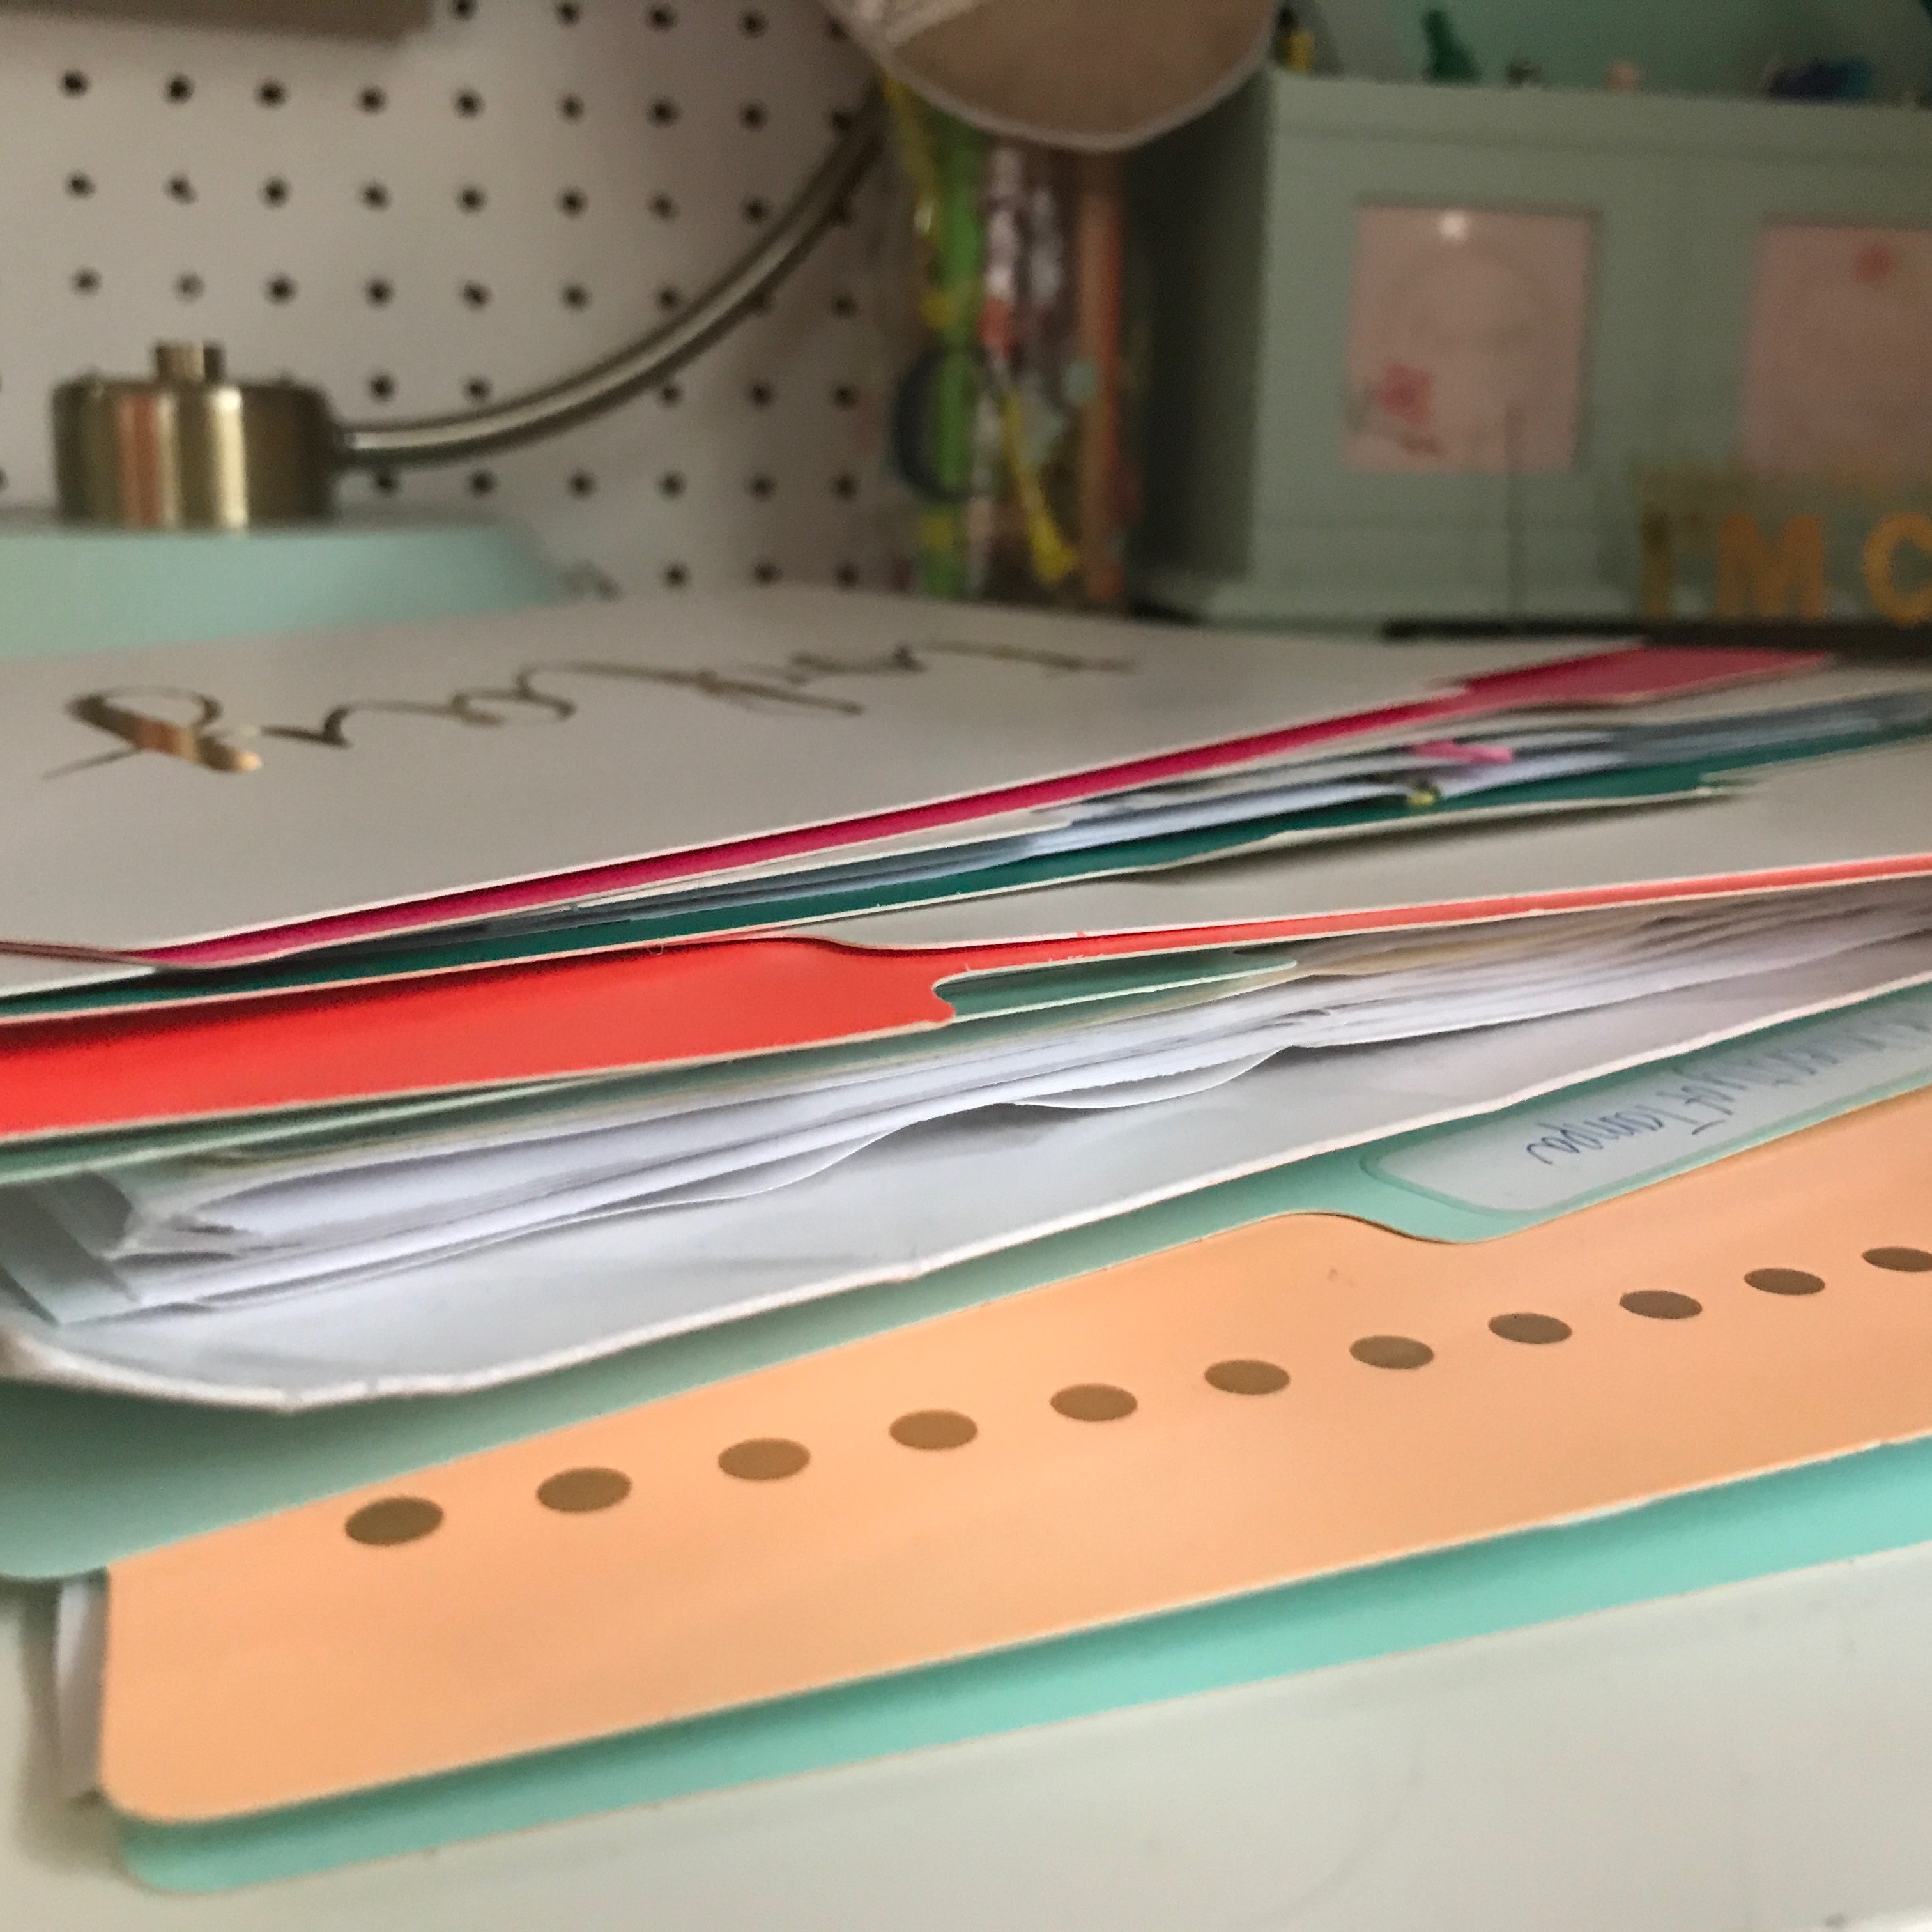 How To Stay Organized For The New Year ~ Organization 101